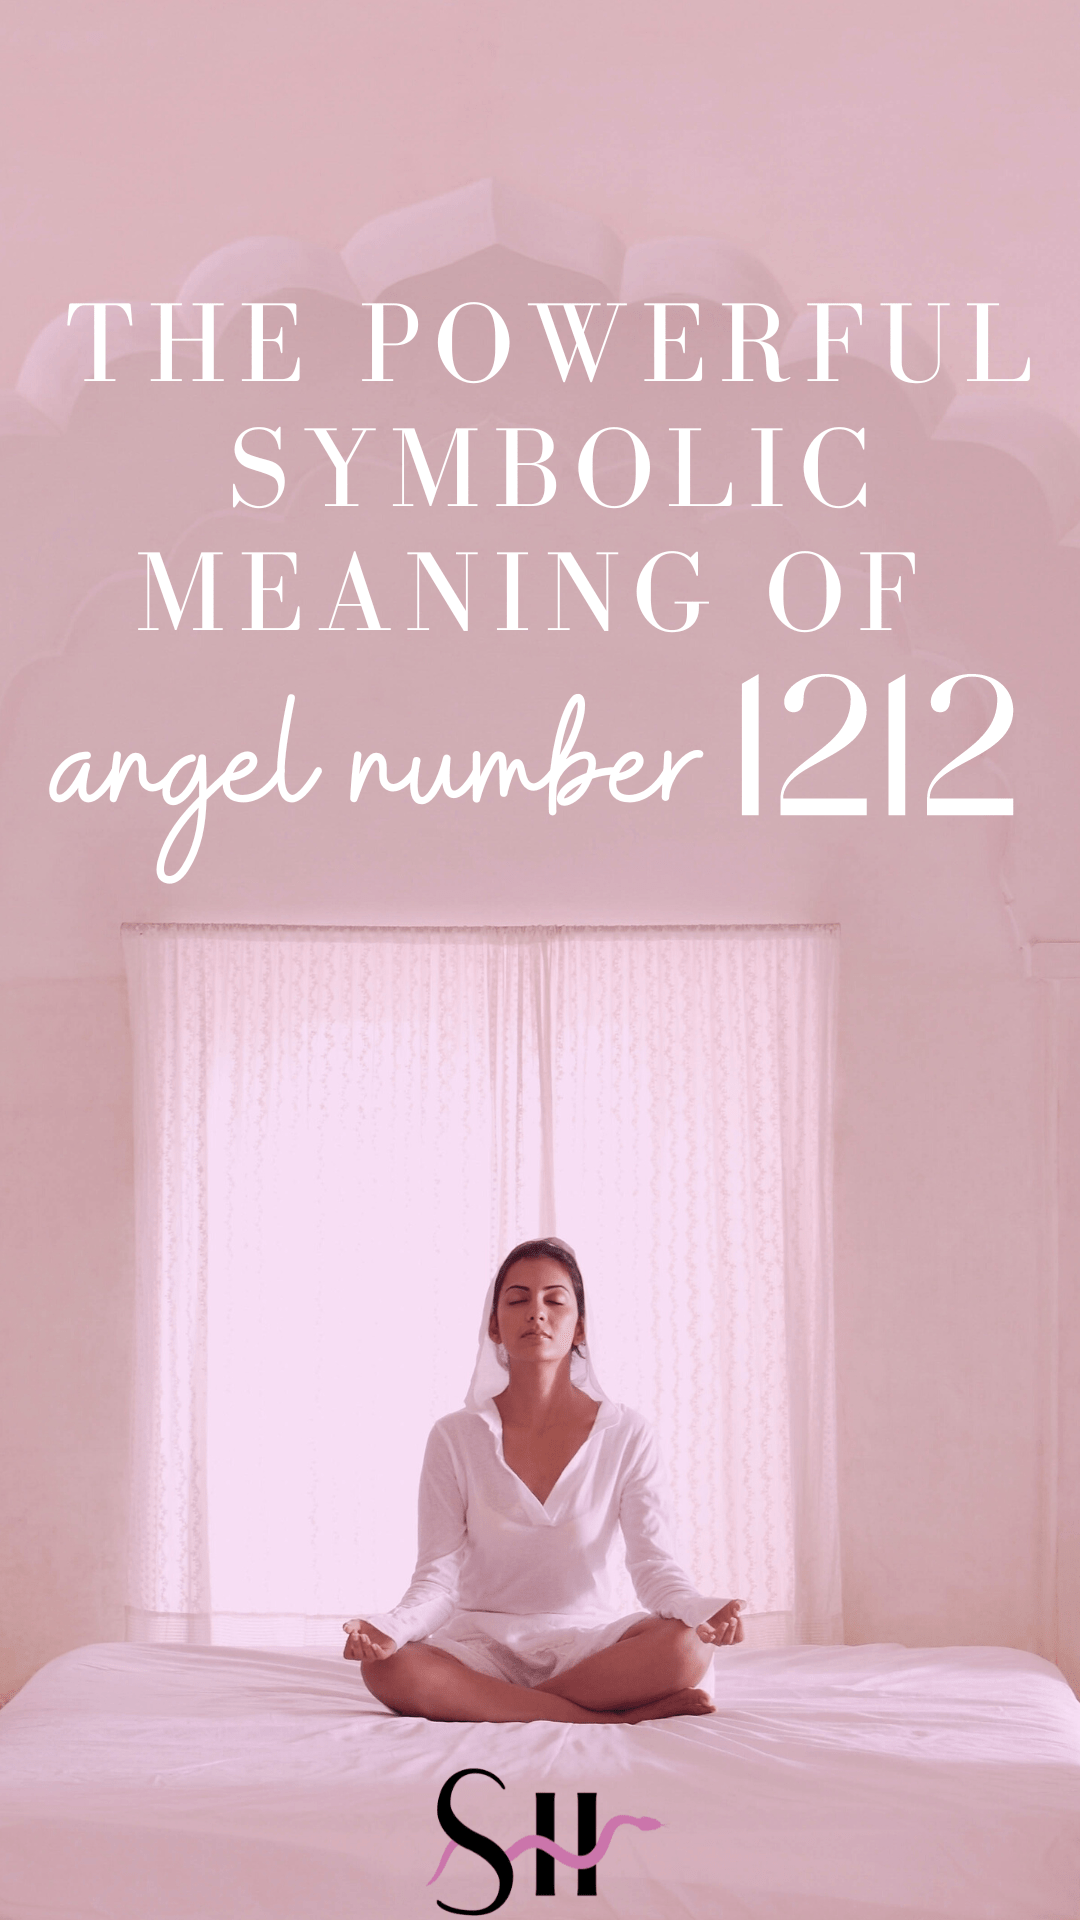 You are currently viewing Angel number 1212: What is the powerful symbolic meaning of 12:12?